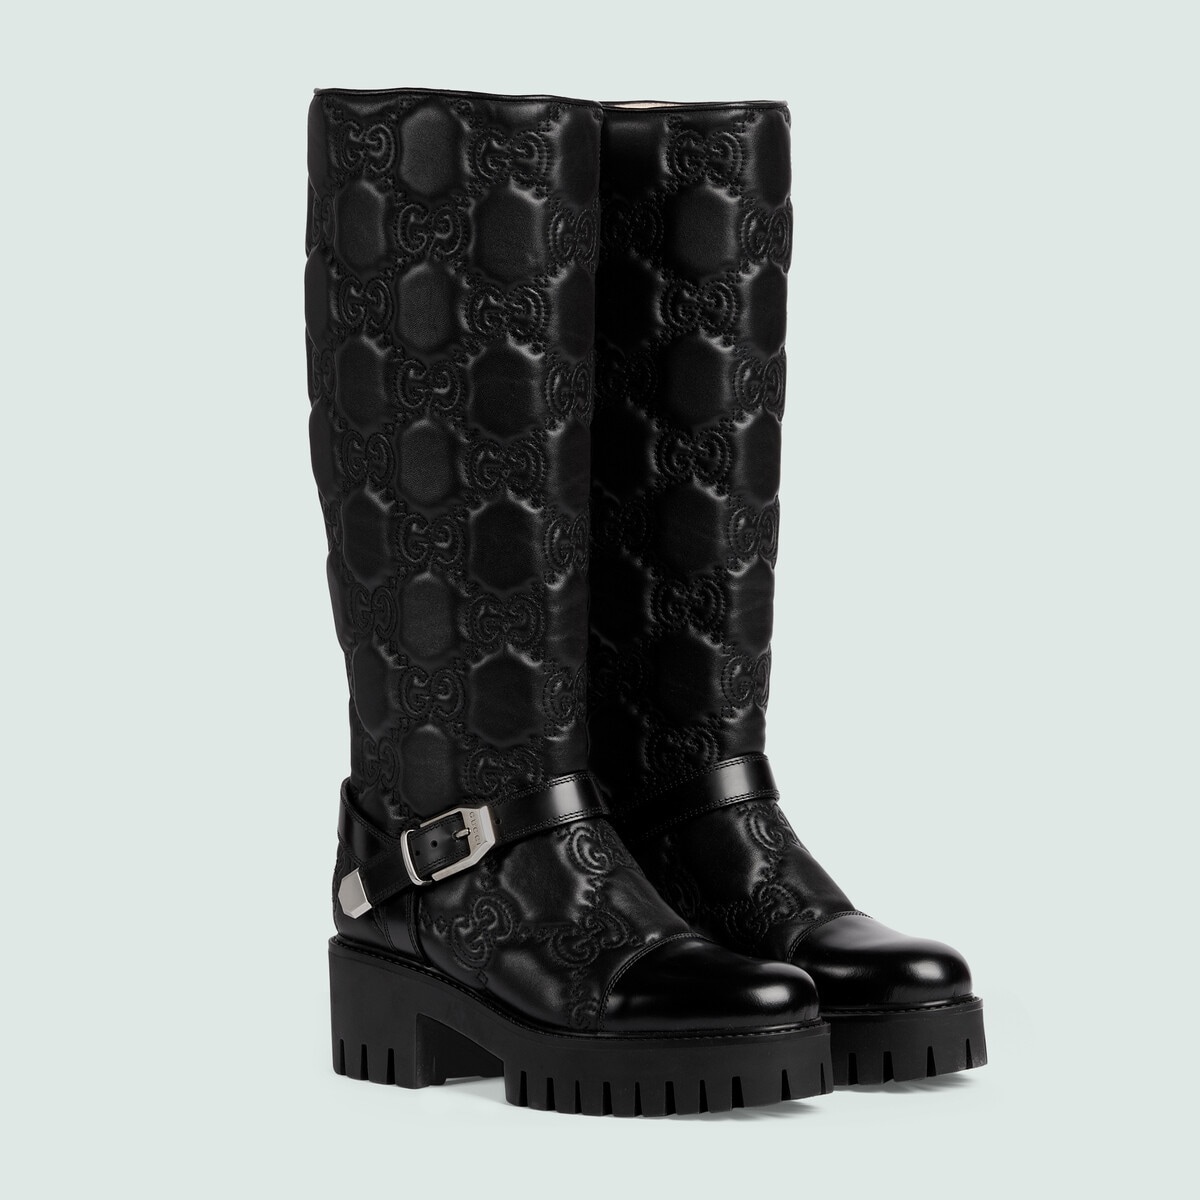 Women's GG quilted boot - 2